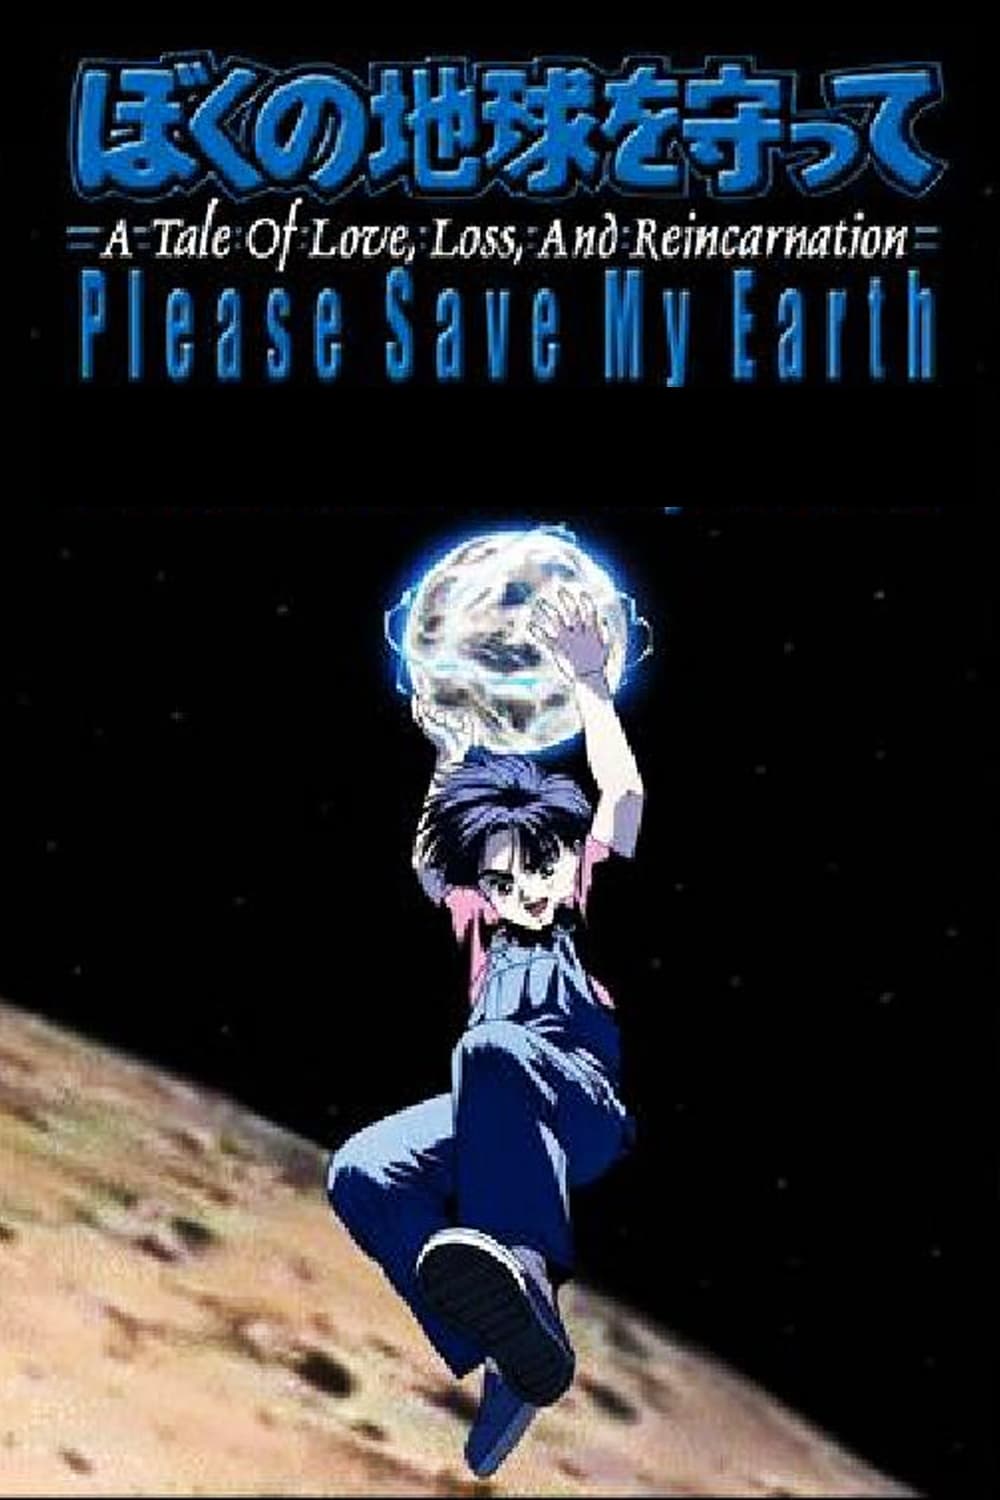 Please Save My Earth (1993)